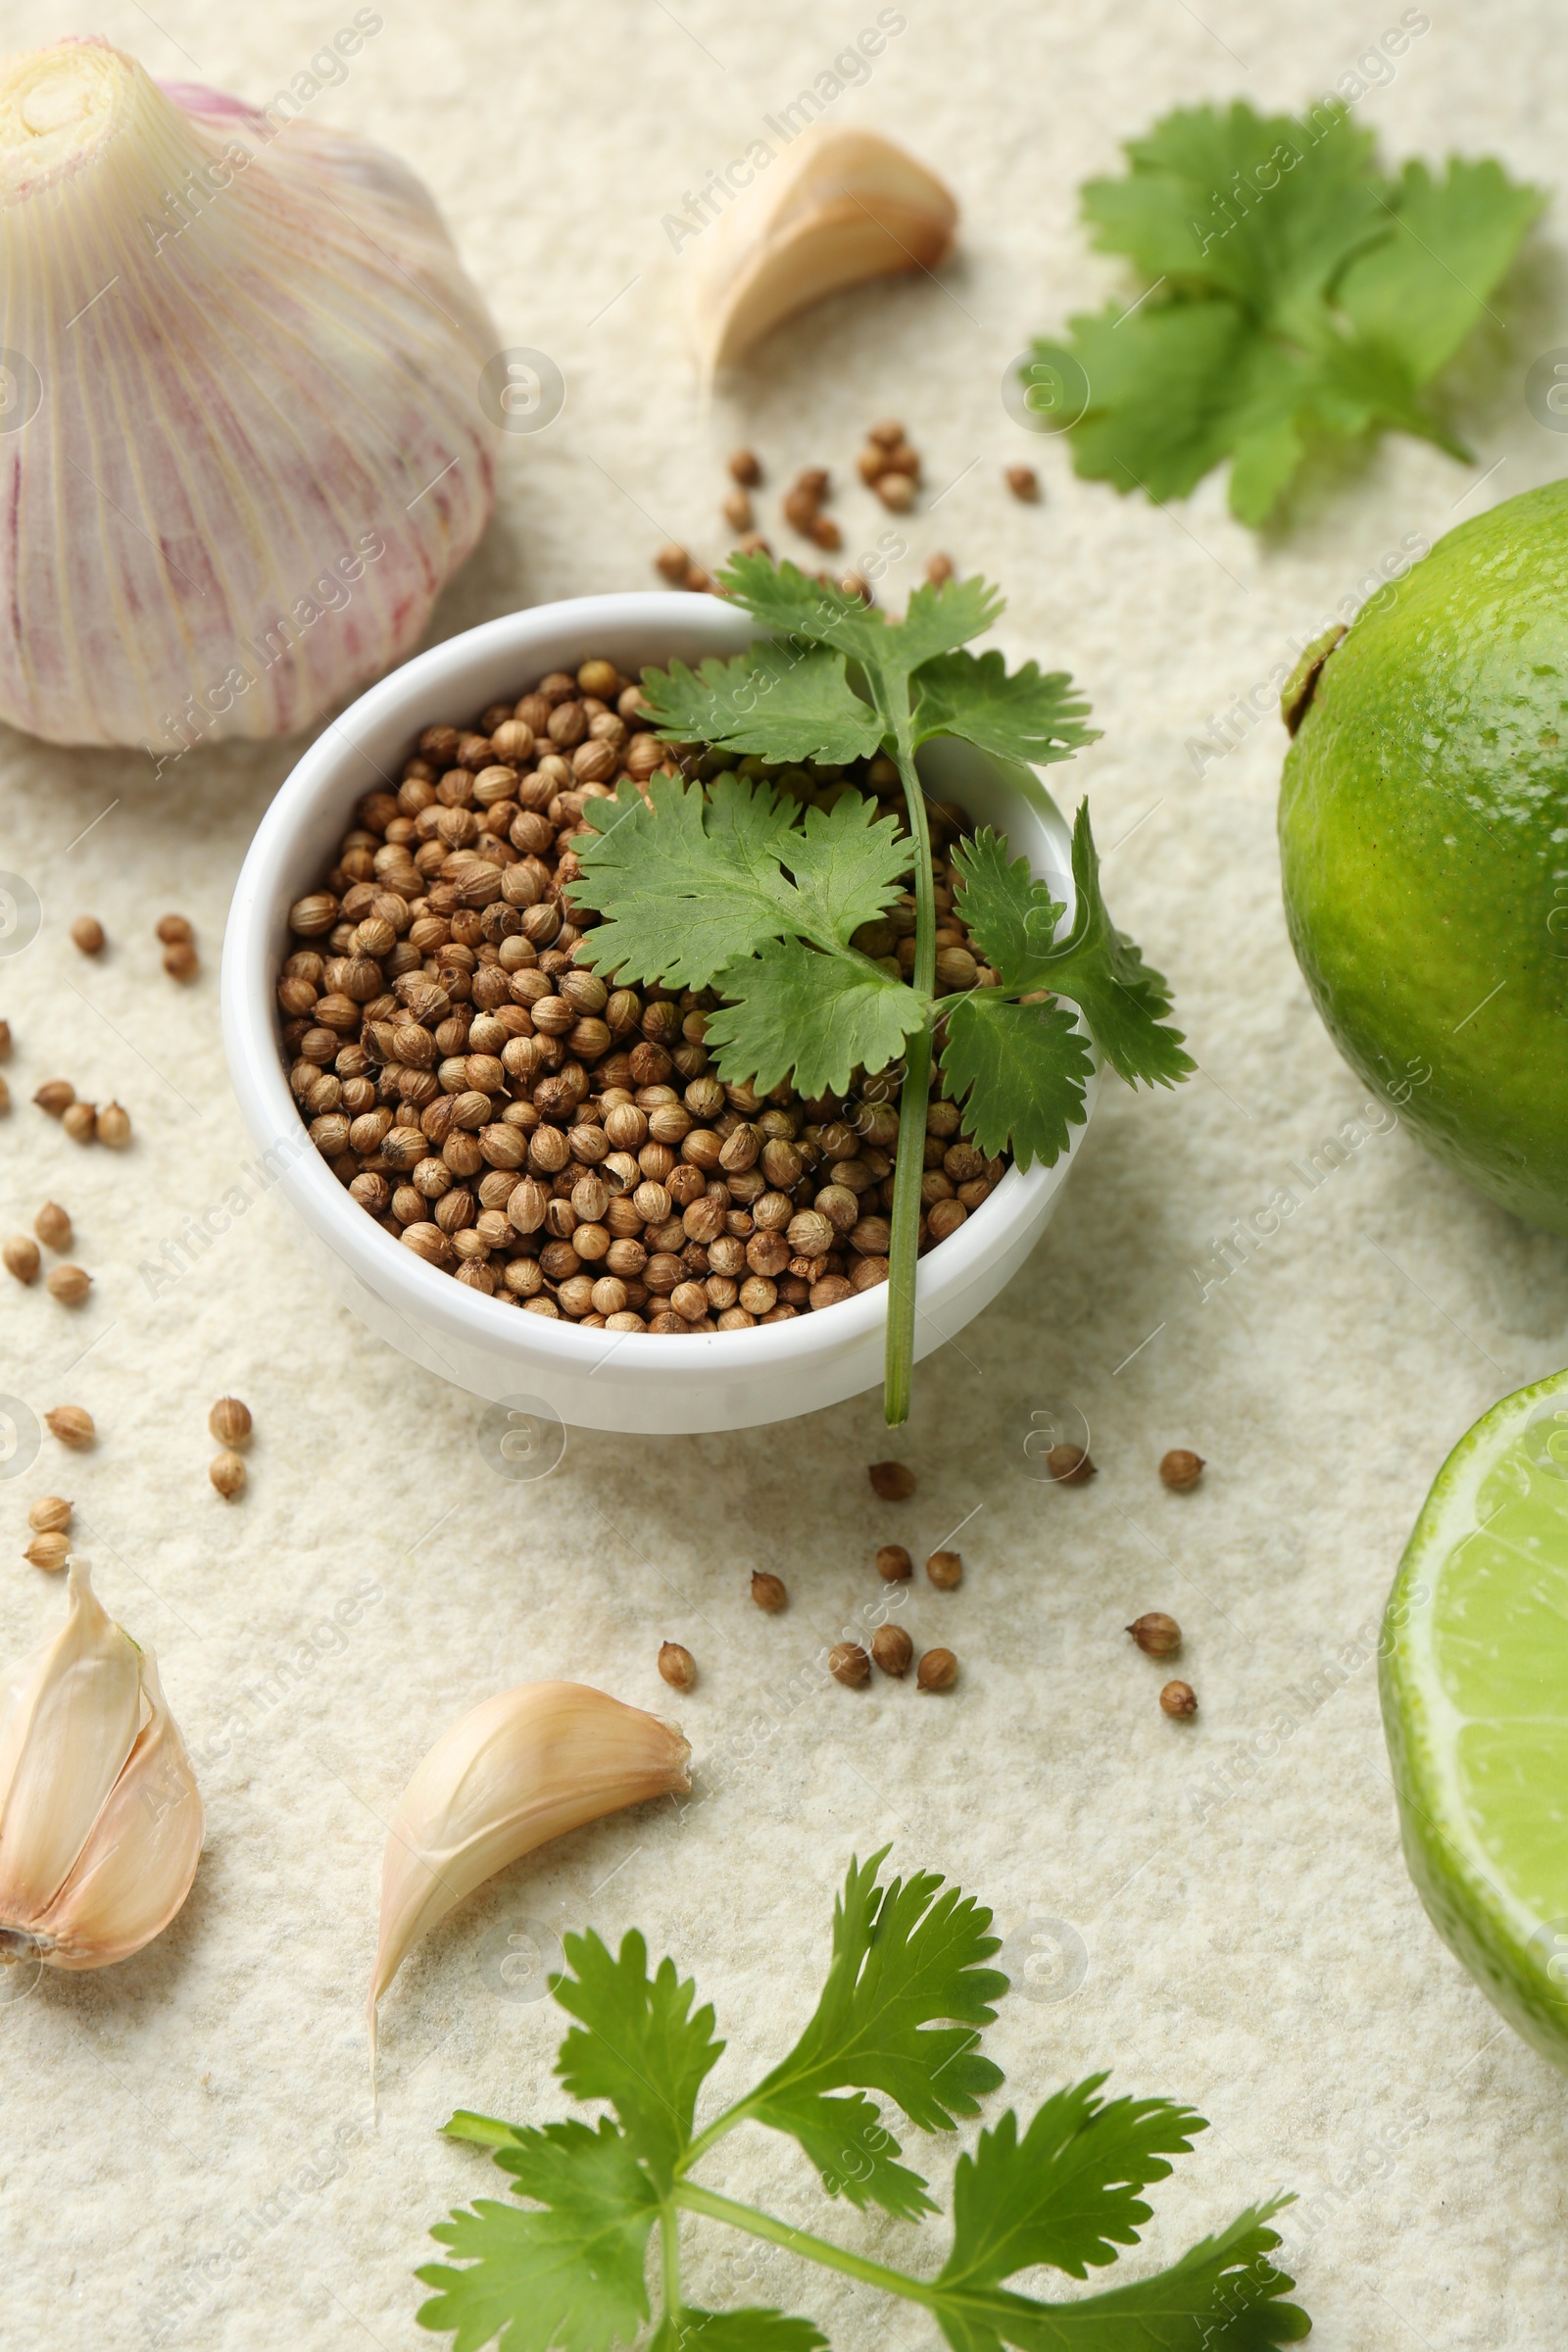 Photo of Fresh coriander leaves, dried seeds, garlic and limes on light textured table